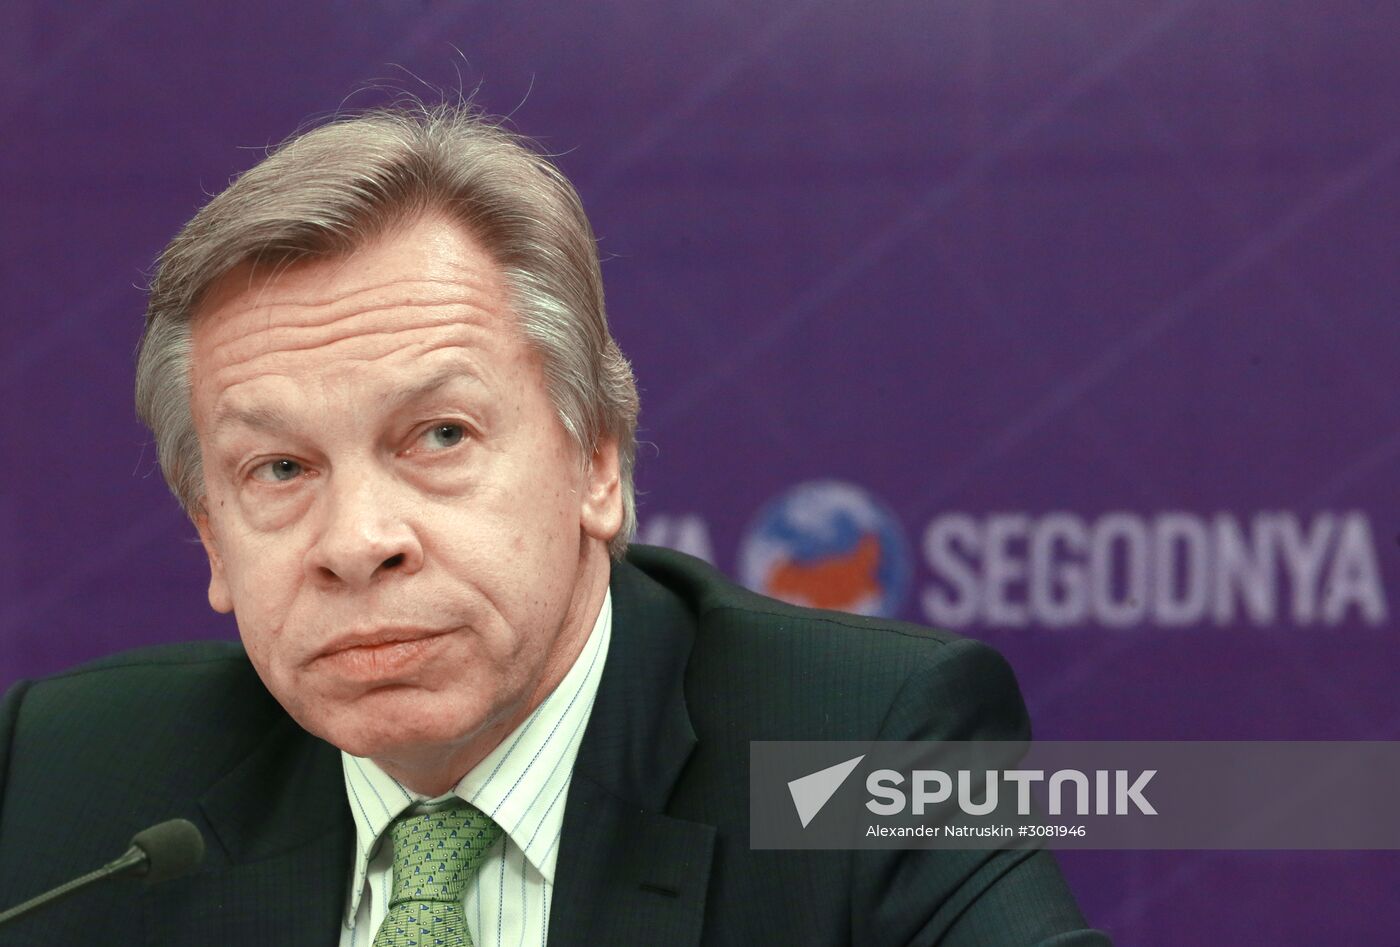 News conference by Alexei Pushkov on the results of the first round in the French presidential election